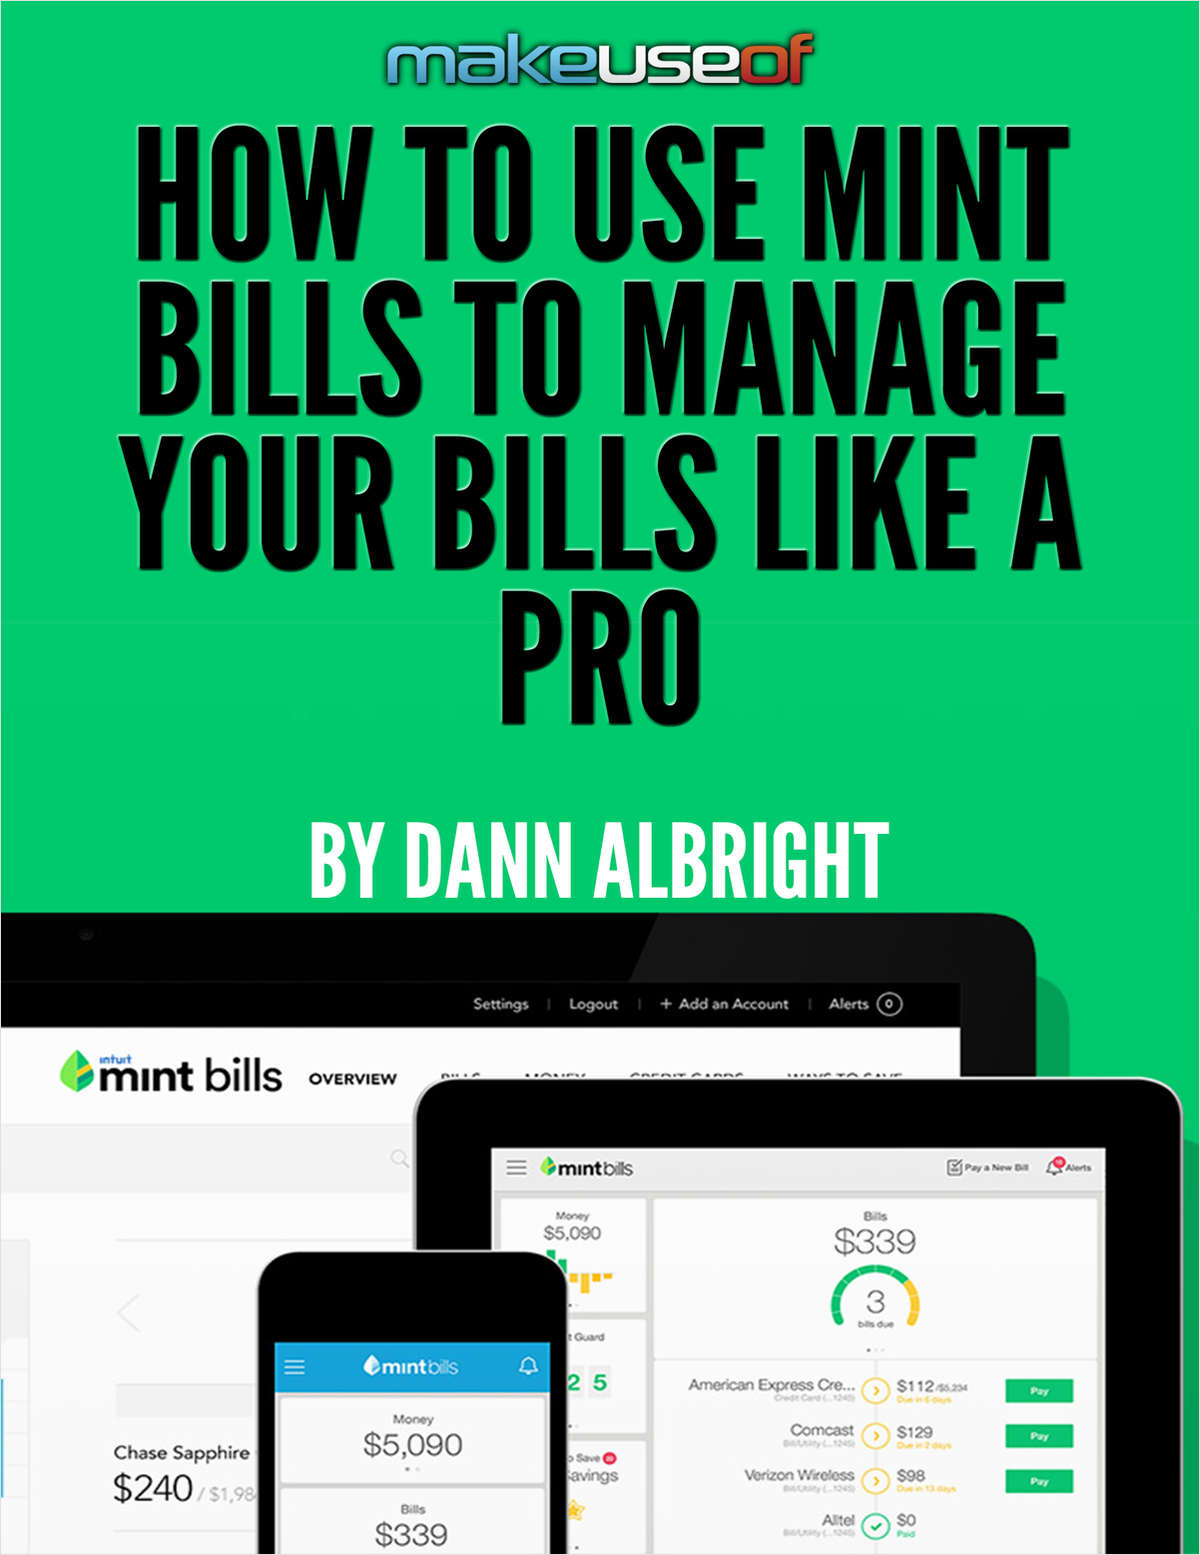 How to Use Mint Bills to Manage Your Bills Like a Pro